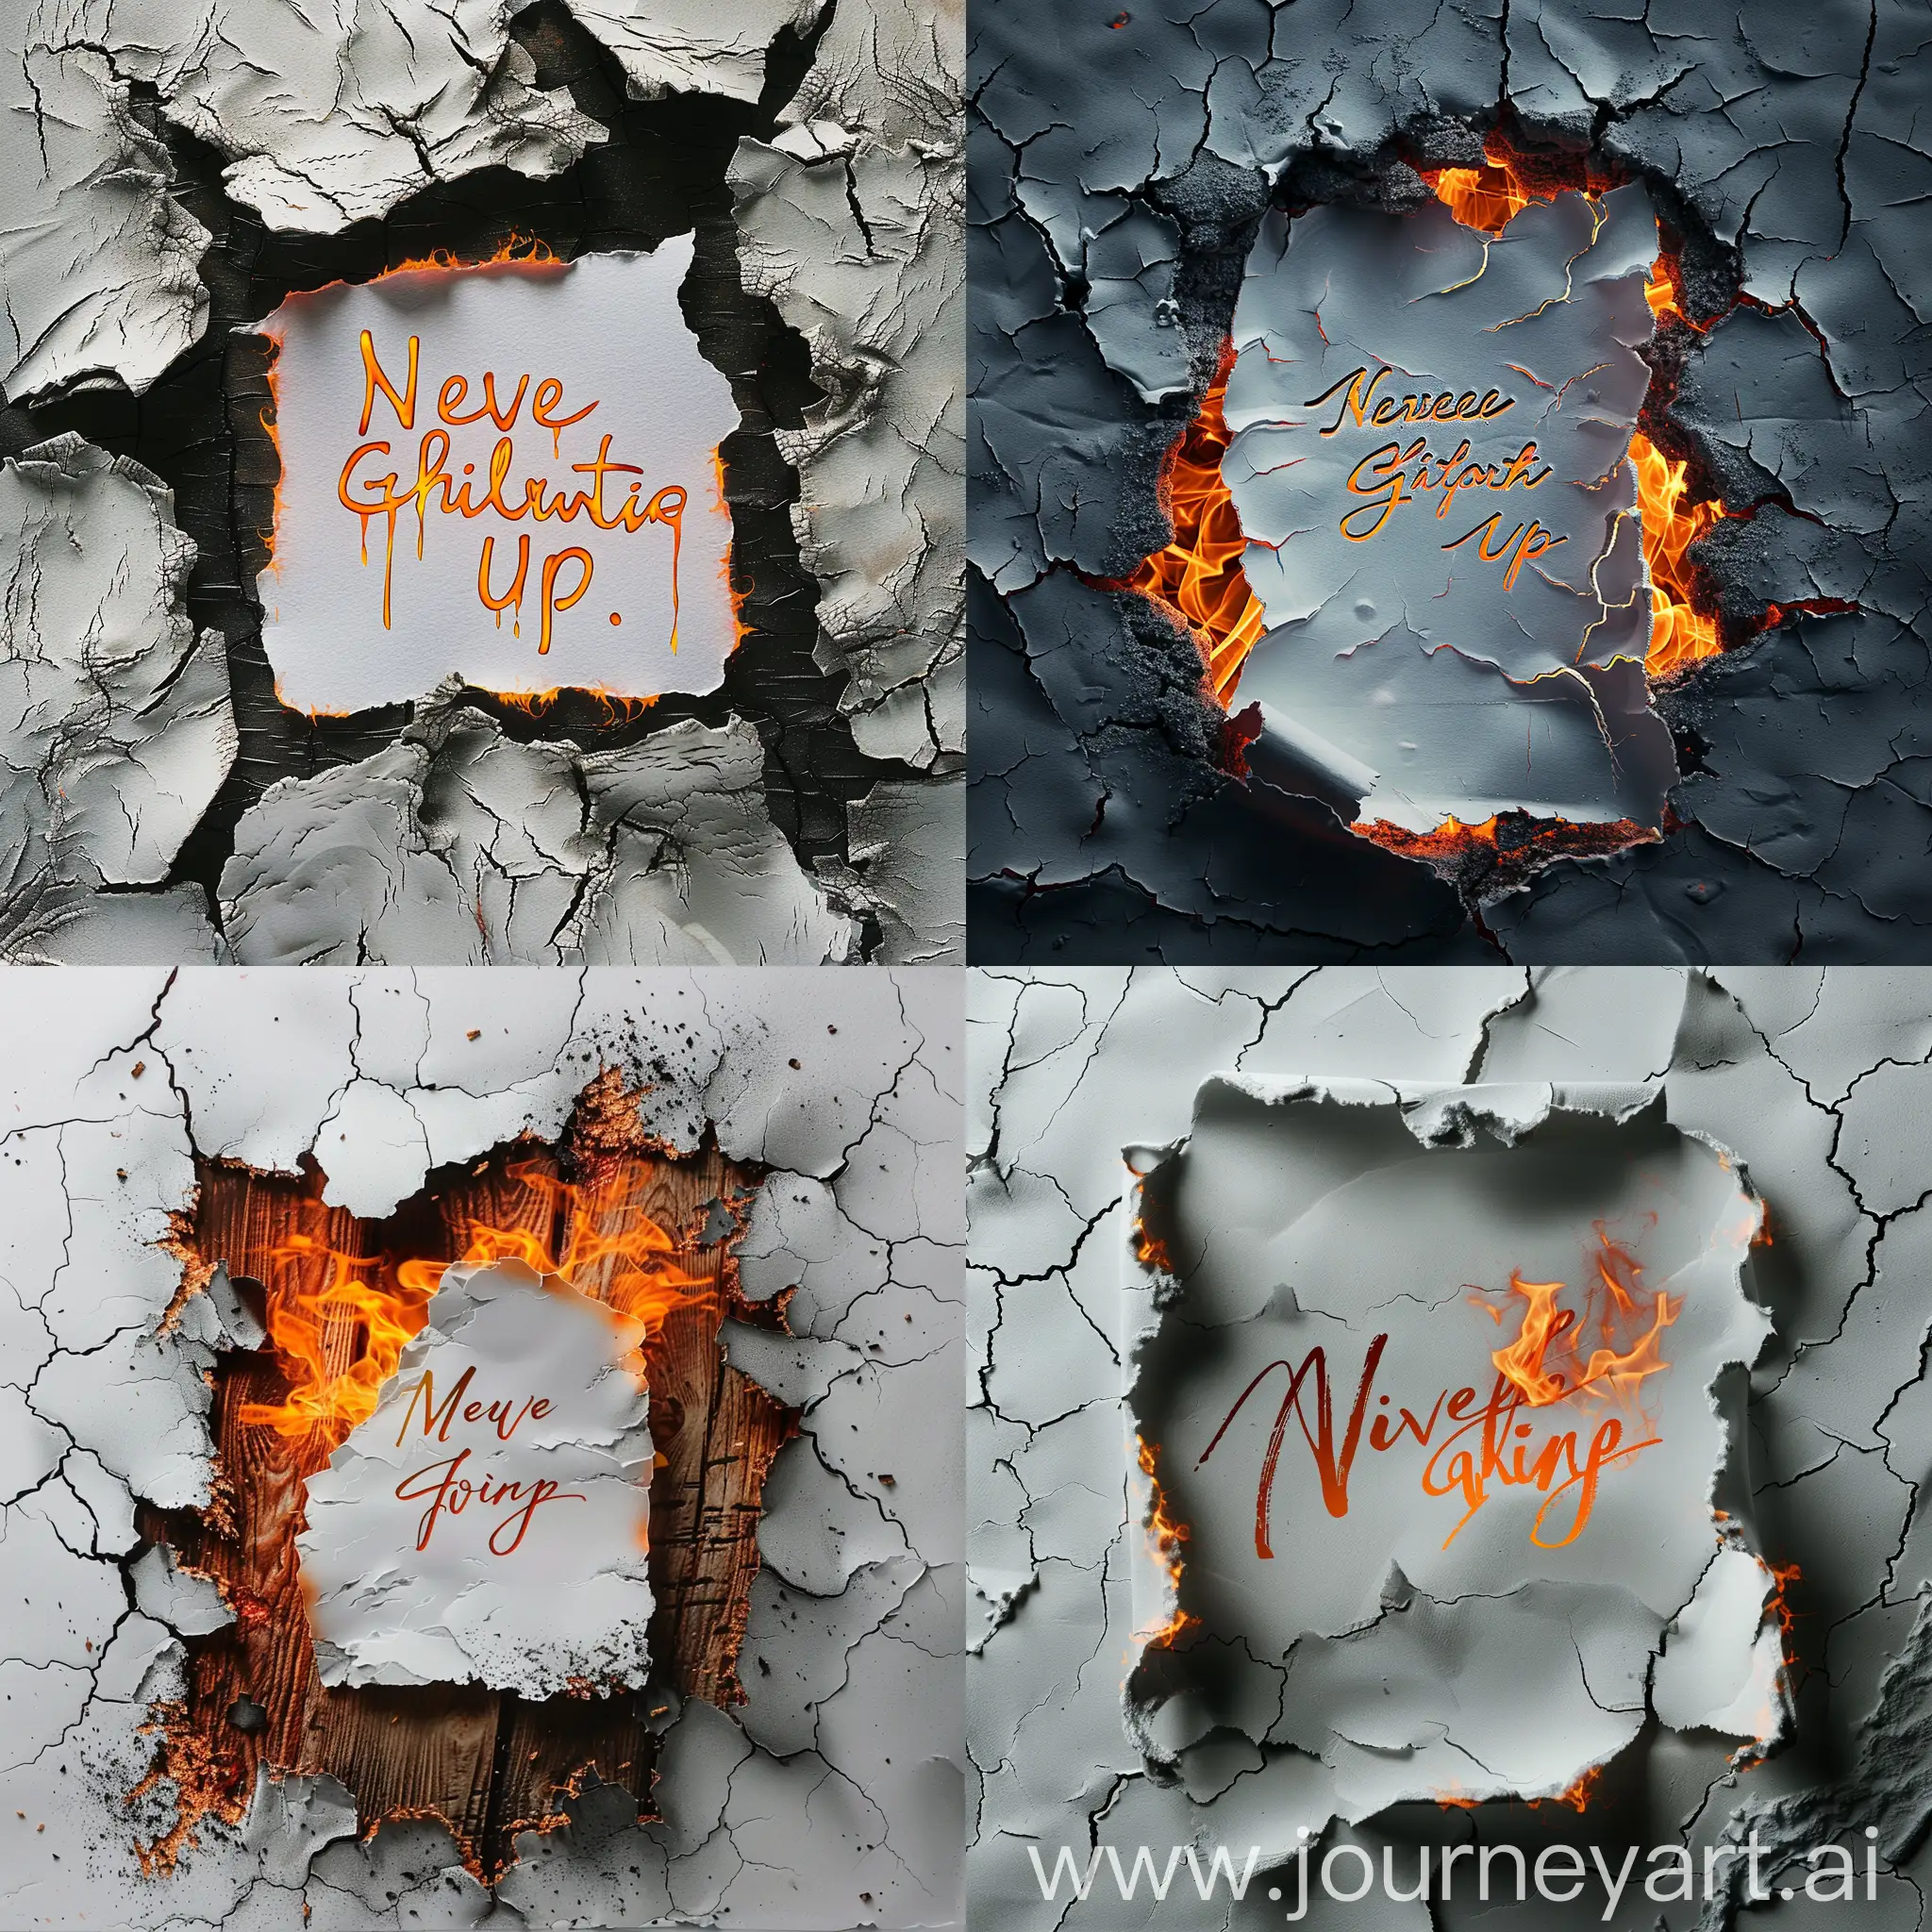 A photorealistic image showing a piece of white paper on a torn background. The paper has a handwritten fire blazing orange quote that reads: 'Never Give up'. The background resembles burning white paper revealing a rough, textured underlayer and ashes, giving the impression of a charred wall or surface. The paper with the quote is smooth and clean, contrasting with the rough and jagged edges of the smoke background. The image is wide, emphasizing the contrast between the burnt edges and the burning paper in the center.